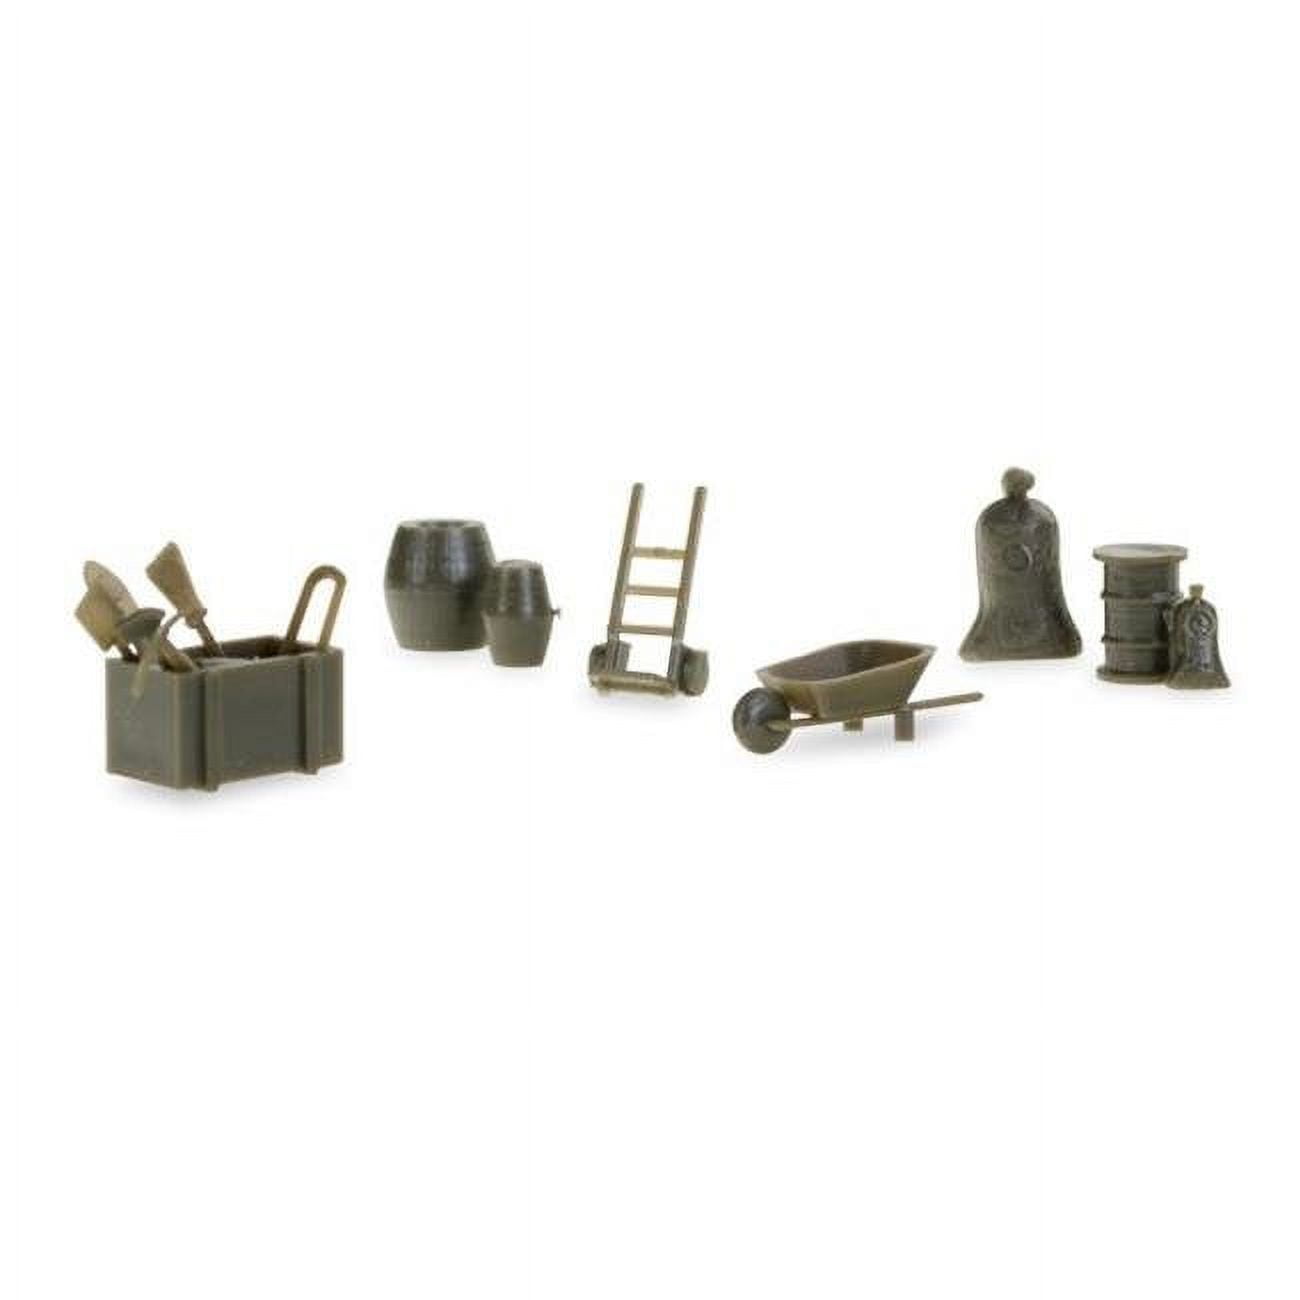 Picture of Herpa 1-87 Military HE745840 Military Wheelbarrows Sack Barrows Barrels - 144 Piece